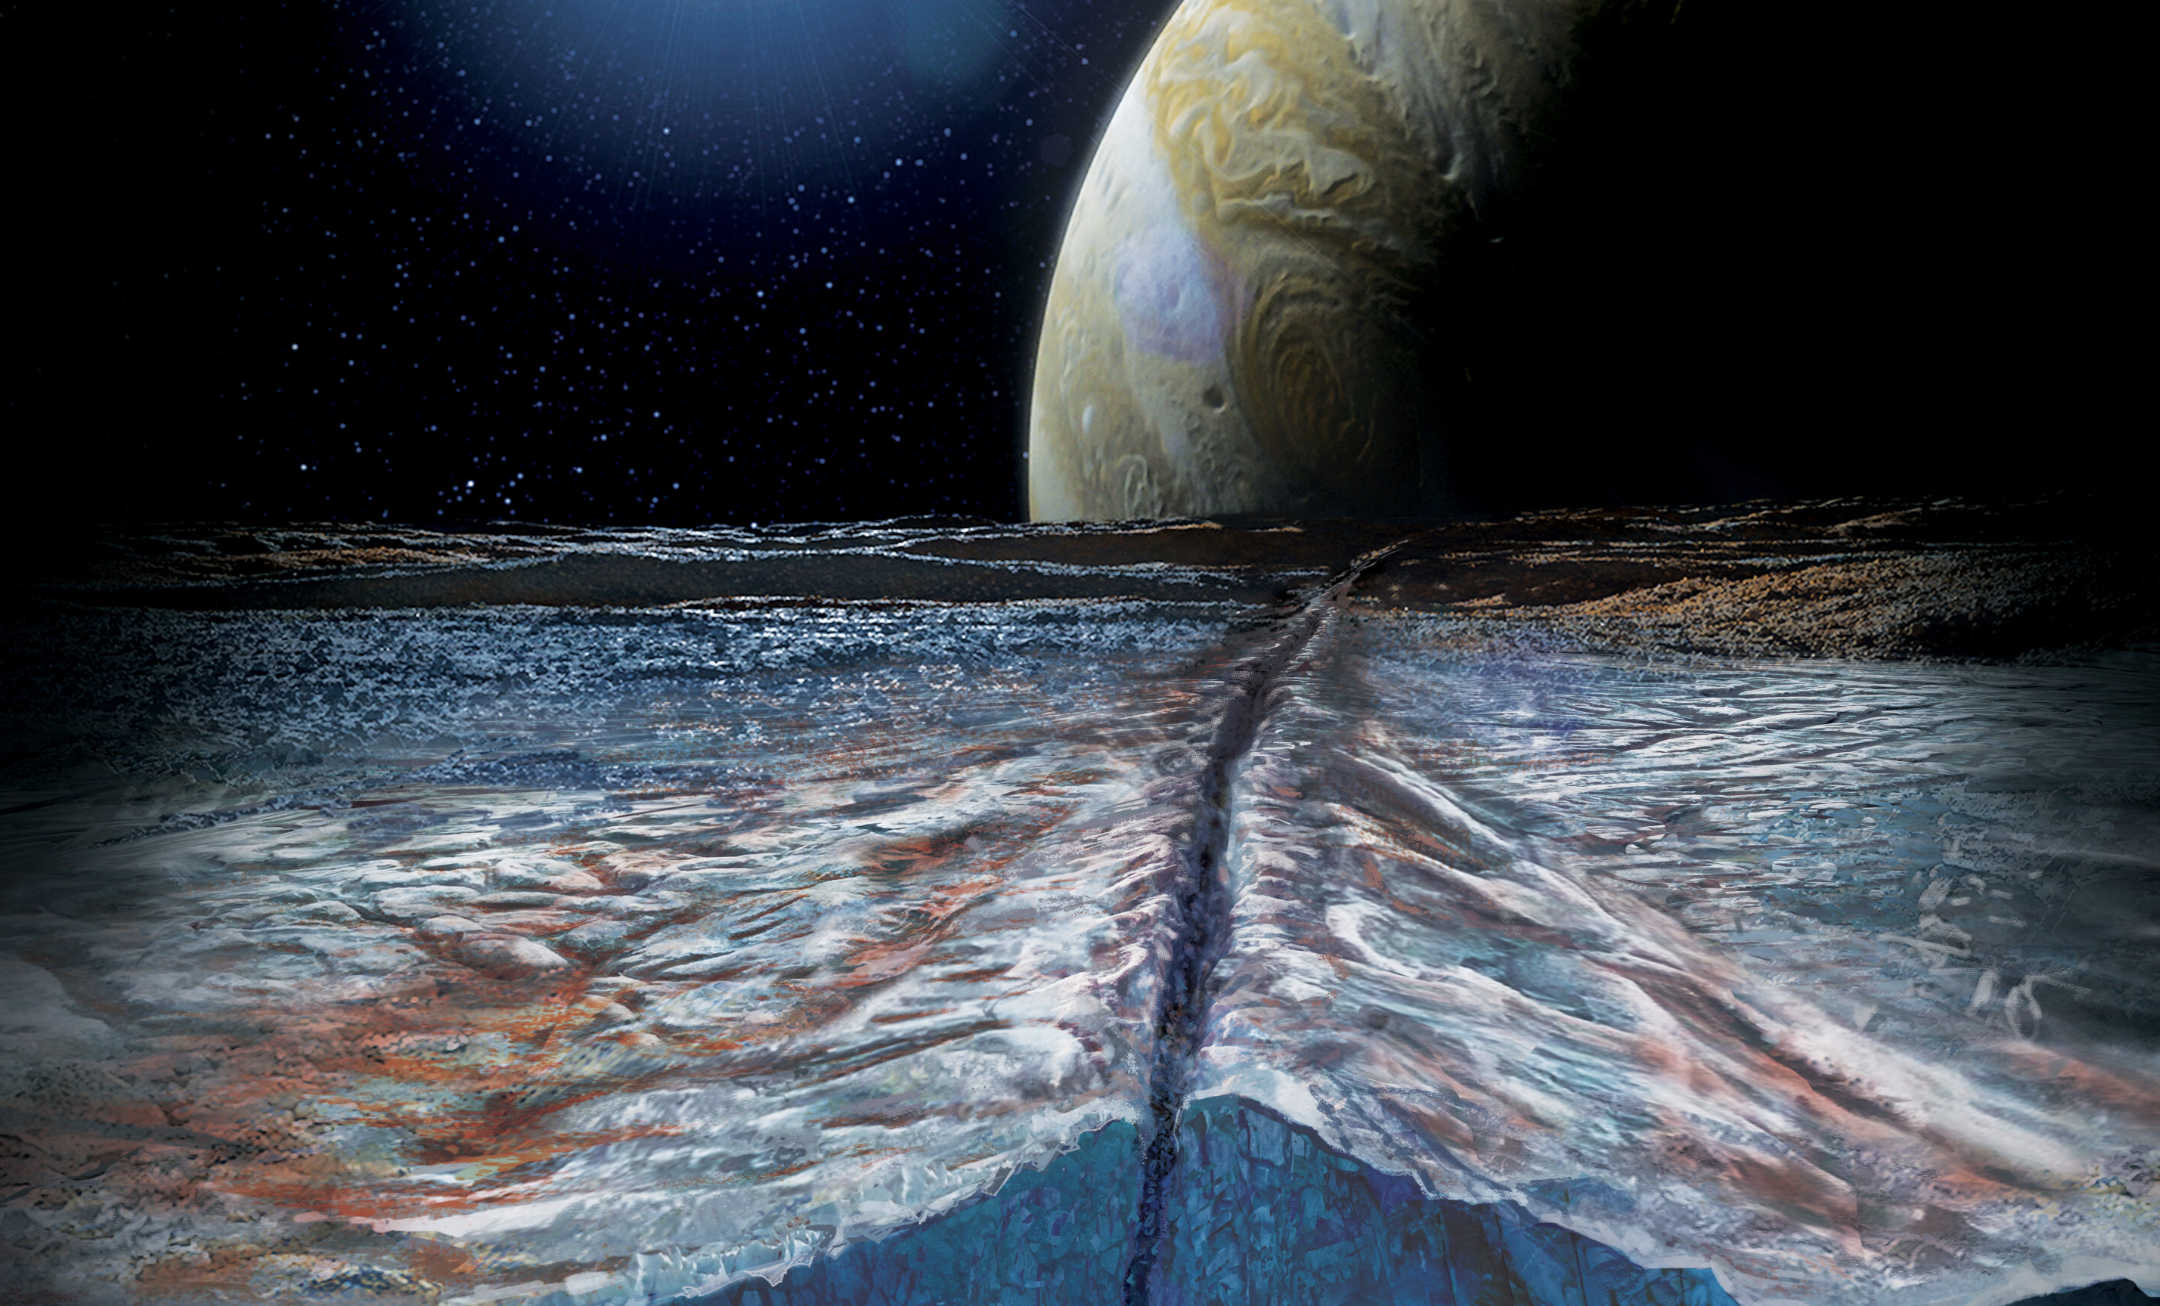 An illustration of an icy moon and a planet in the solar system. Image Credit: NASA/JPL-Caltech/SwRI.